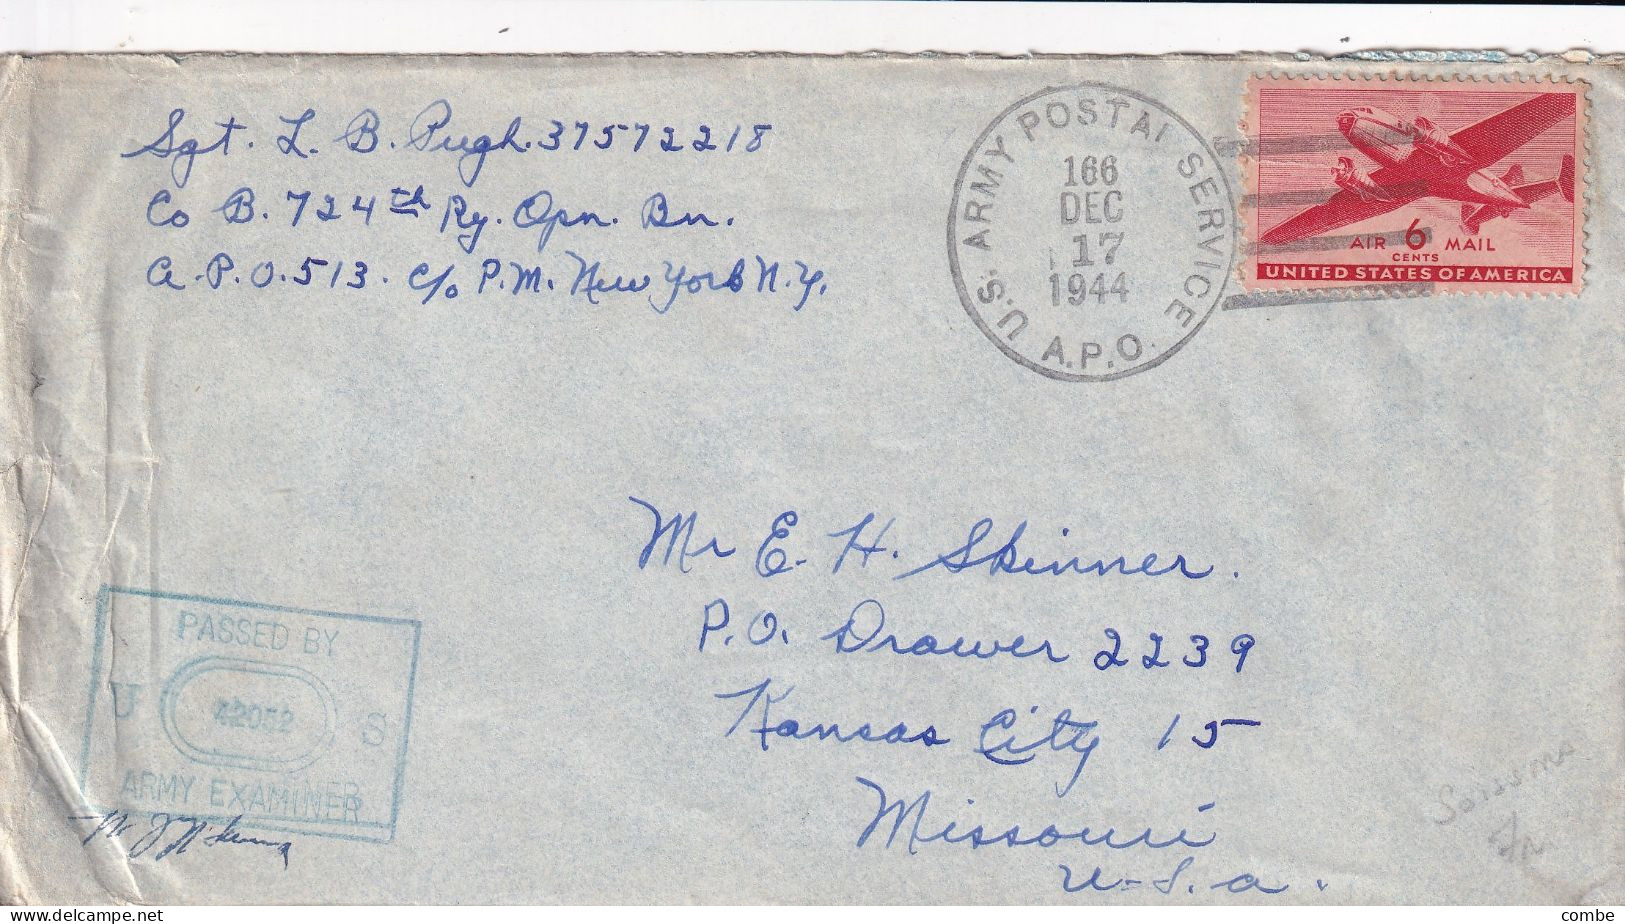 COVER. 17 DEC 1944. APO 166. SOISSONS FRANCE. PASSED BY EXAMINER. TO BALTIMORE - Covers & Documents